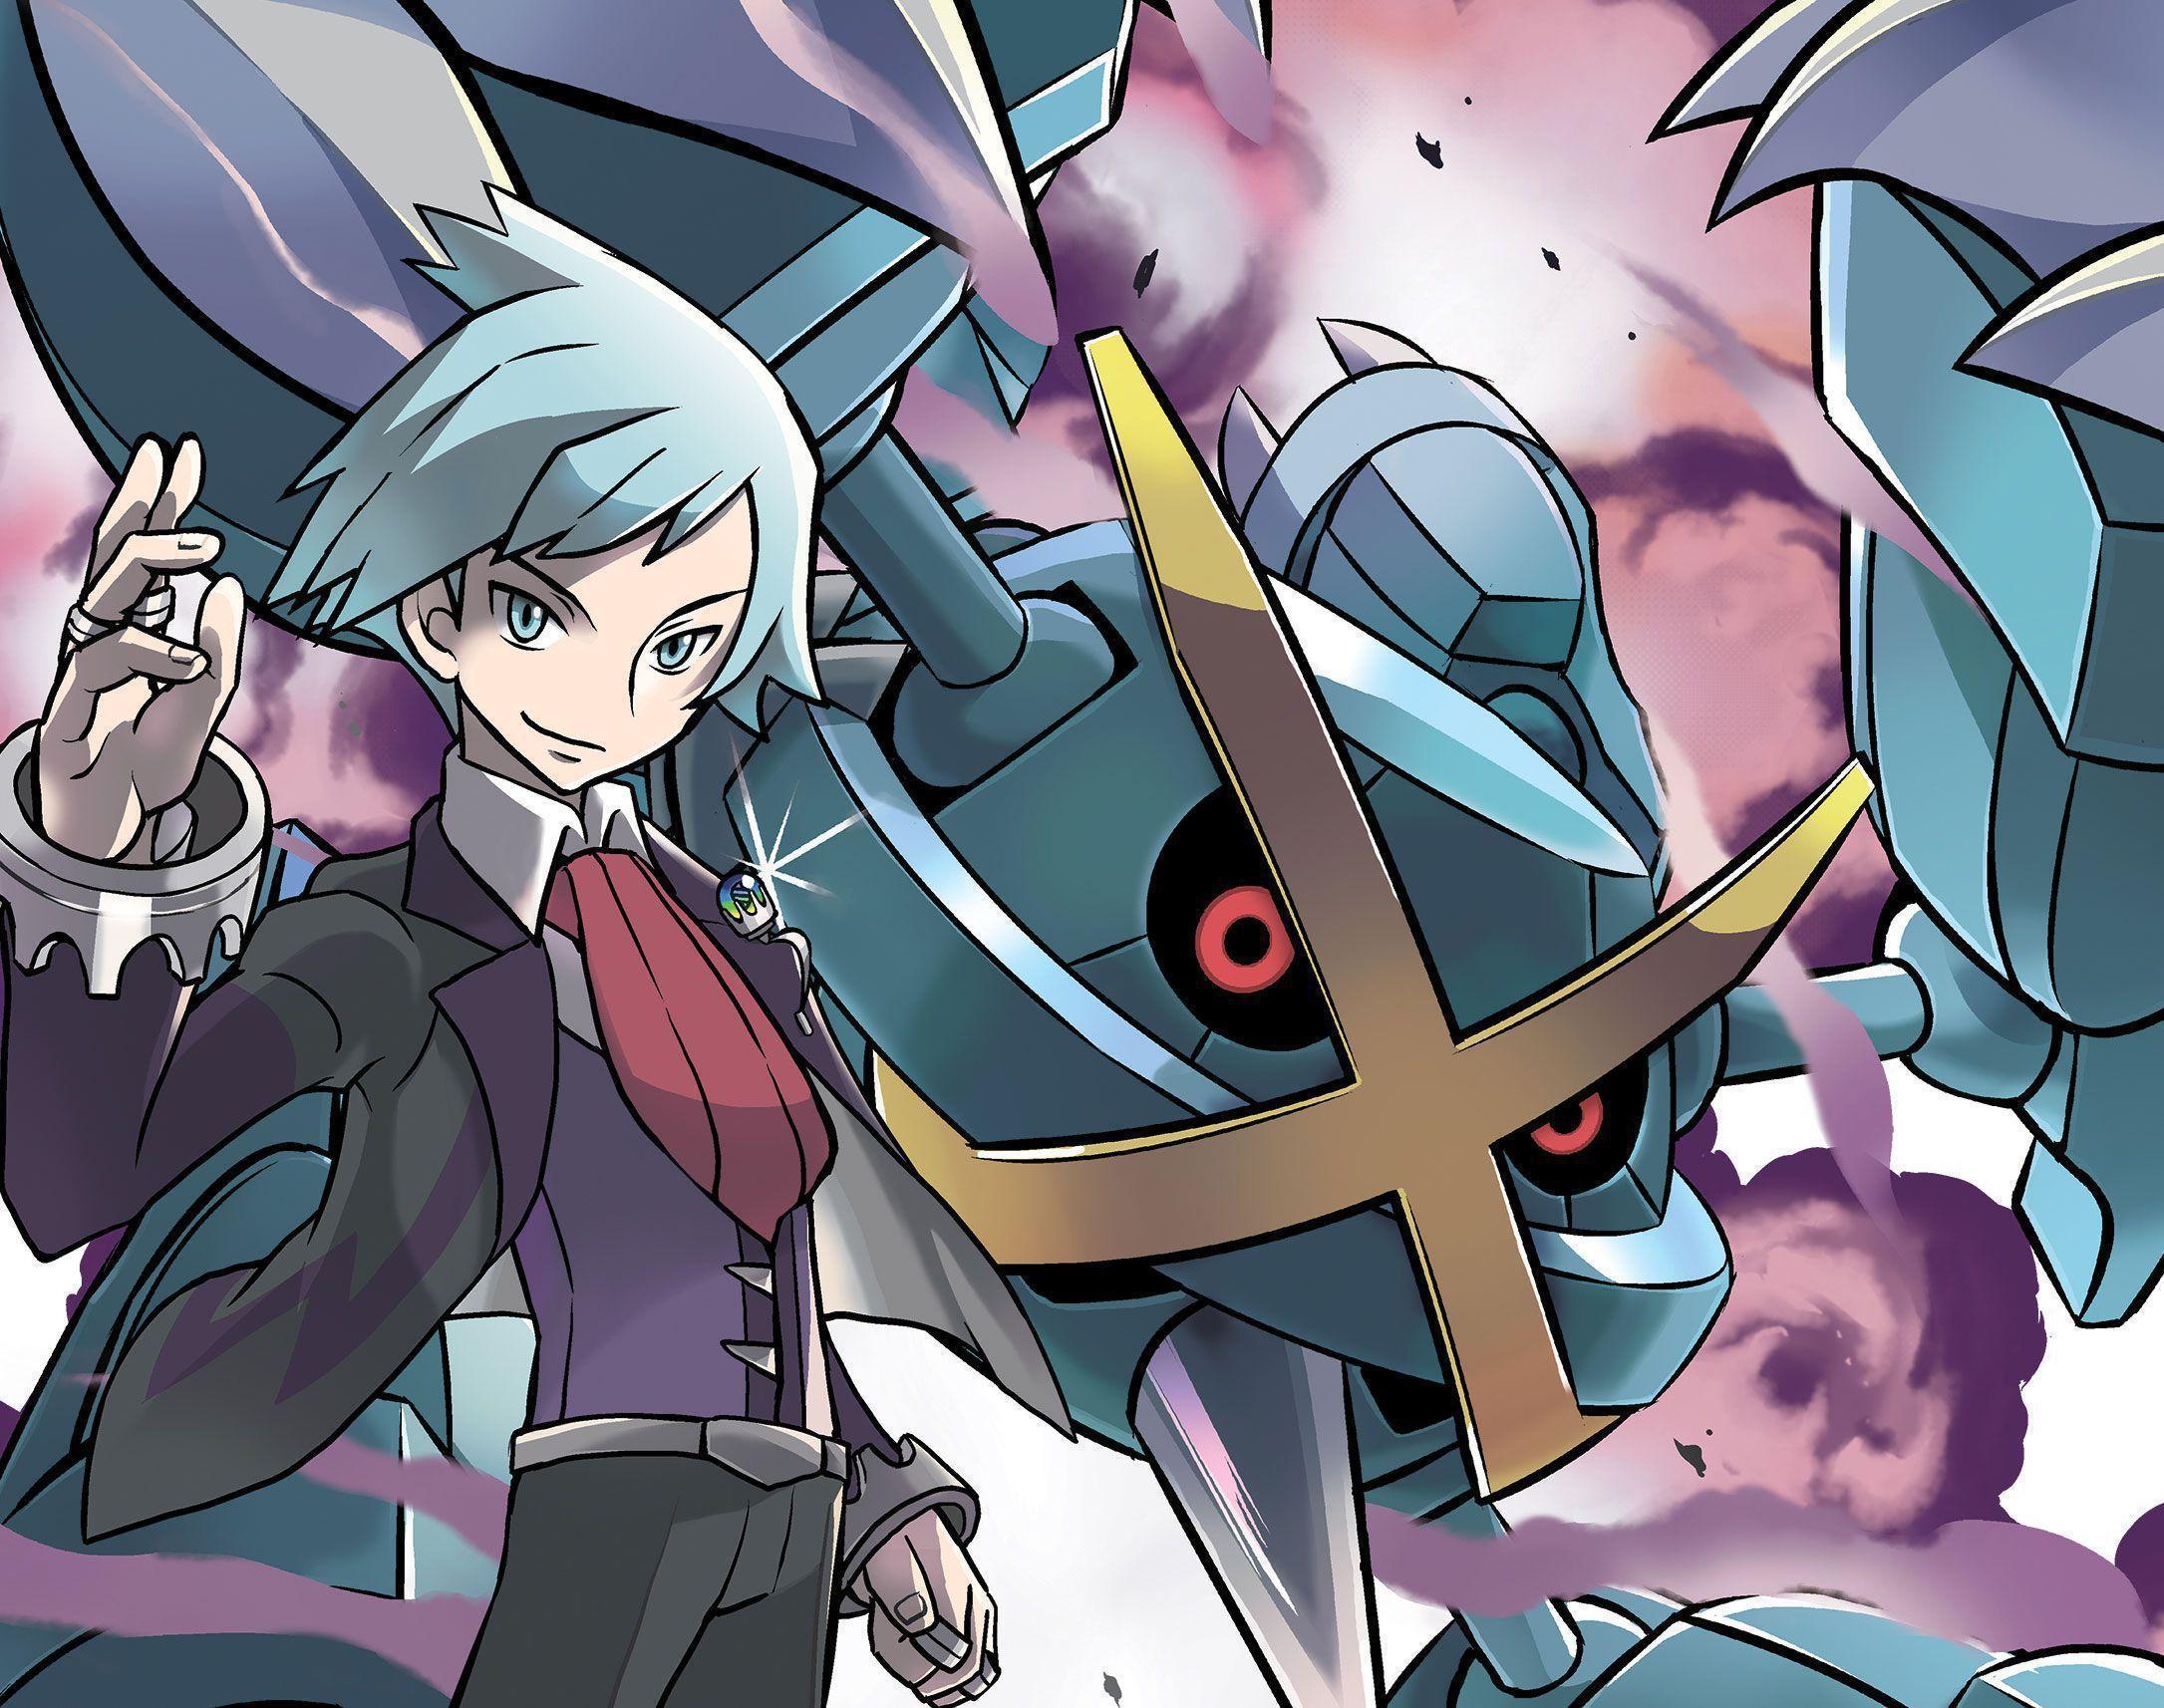 Metagross Wallpapers Image Photos Pictures Backgrounds.